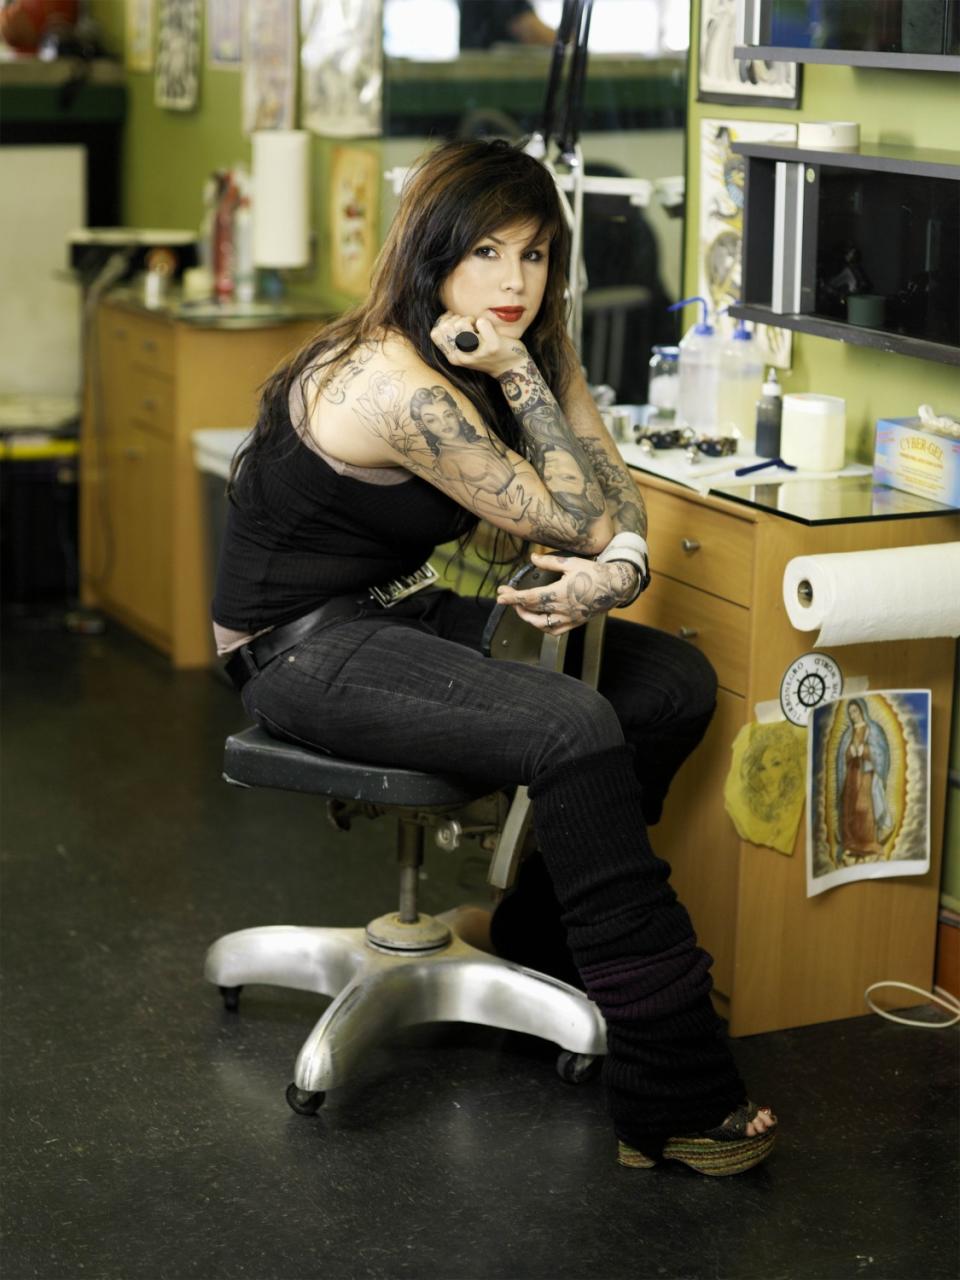 Kat Von D in a tattoo parlor on "Miami Ink."